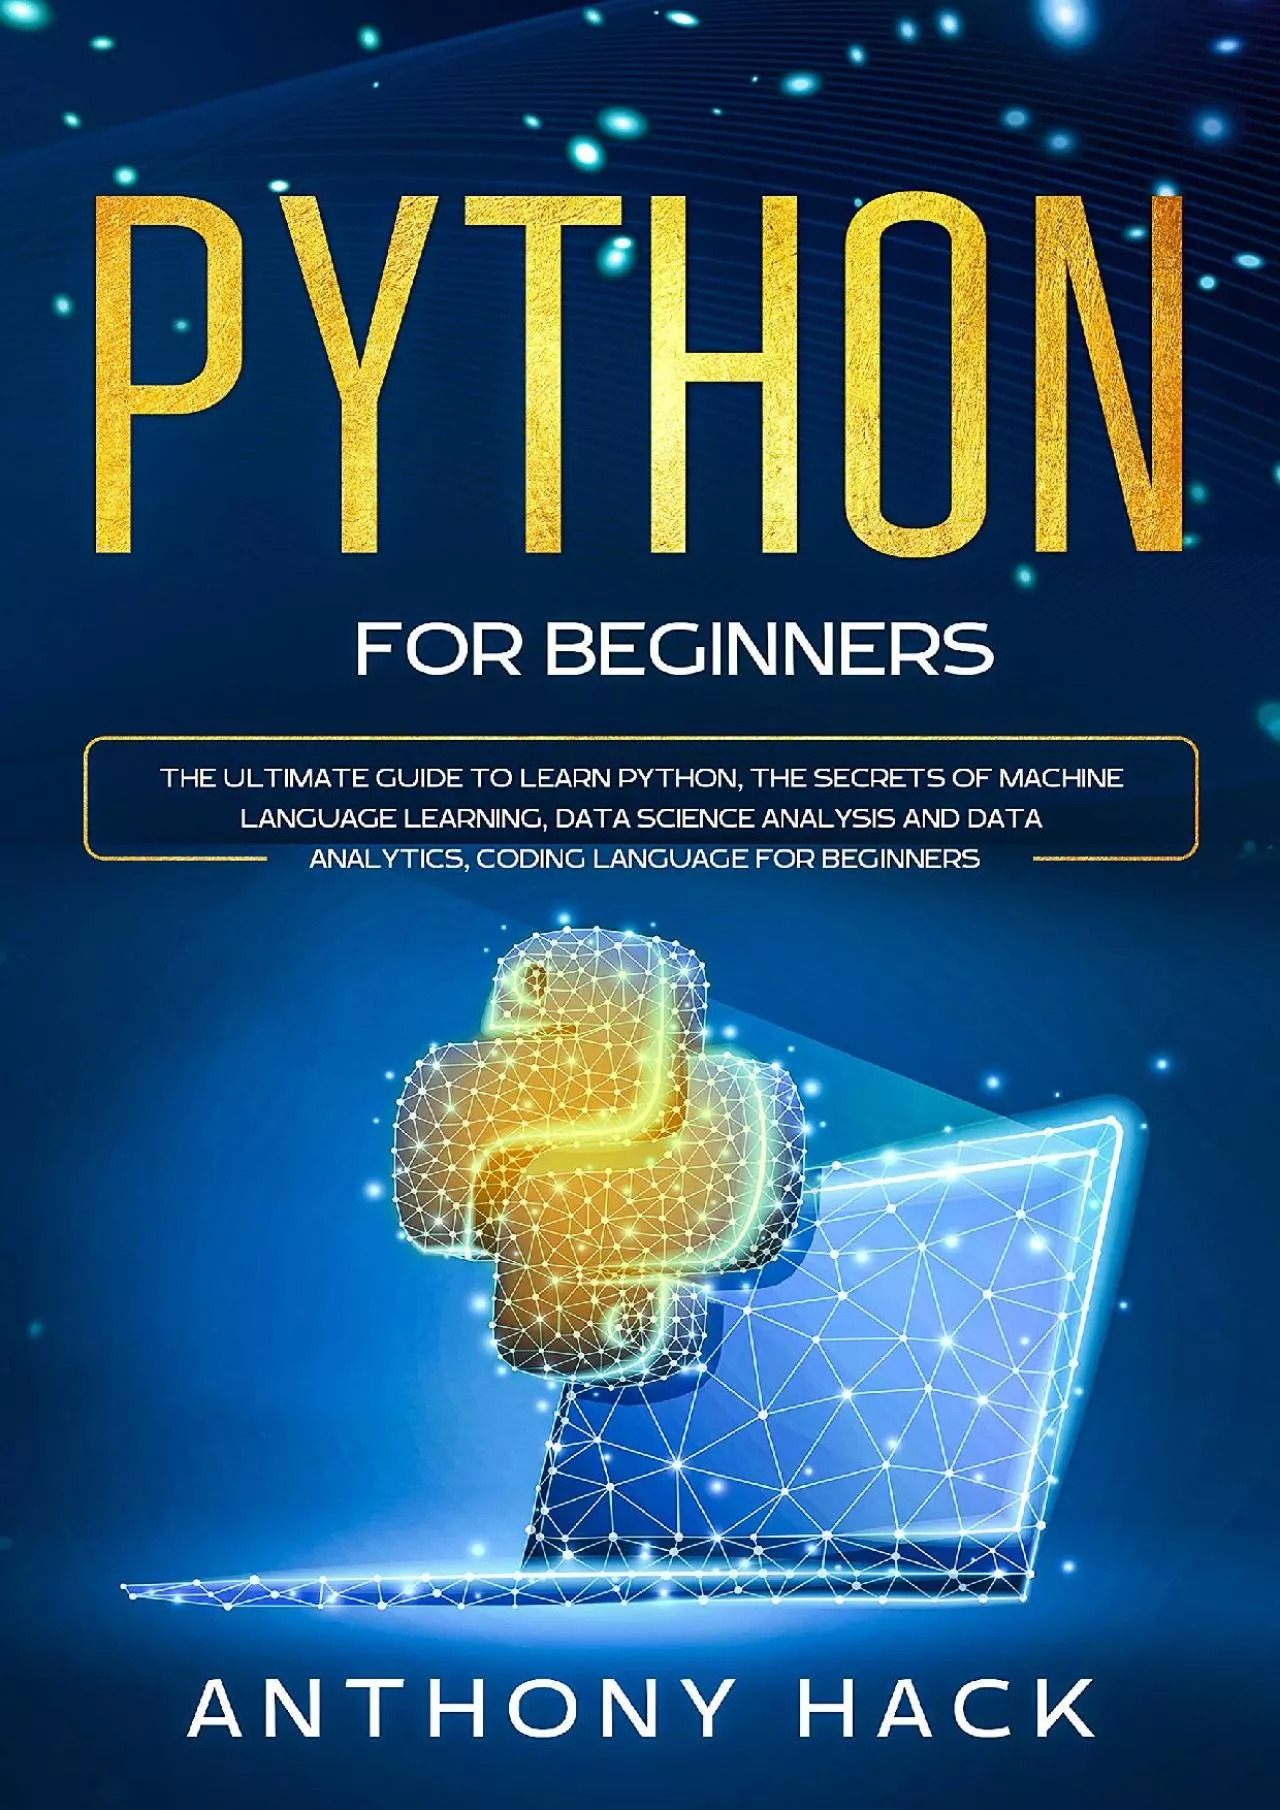 [READING BOOK]-PYTHON FOR BEGINNERS: The Ultimate Guide to Learn Python, the Secrets of